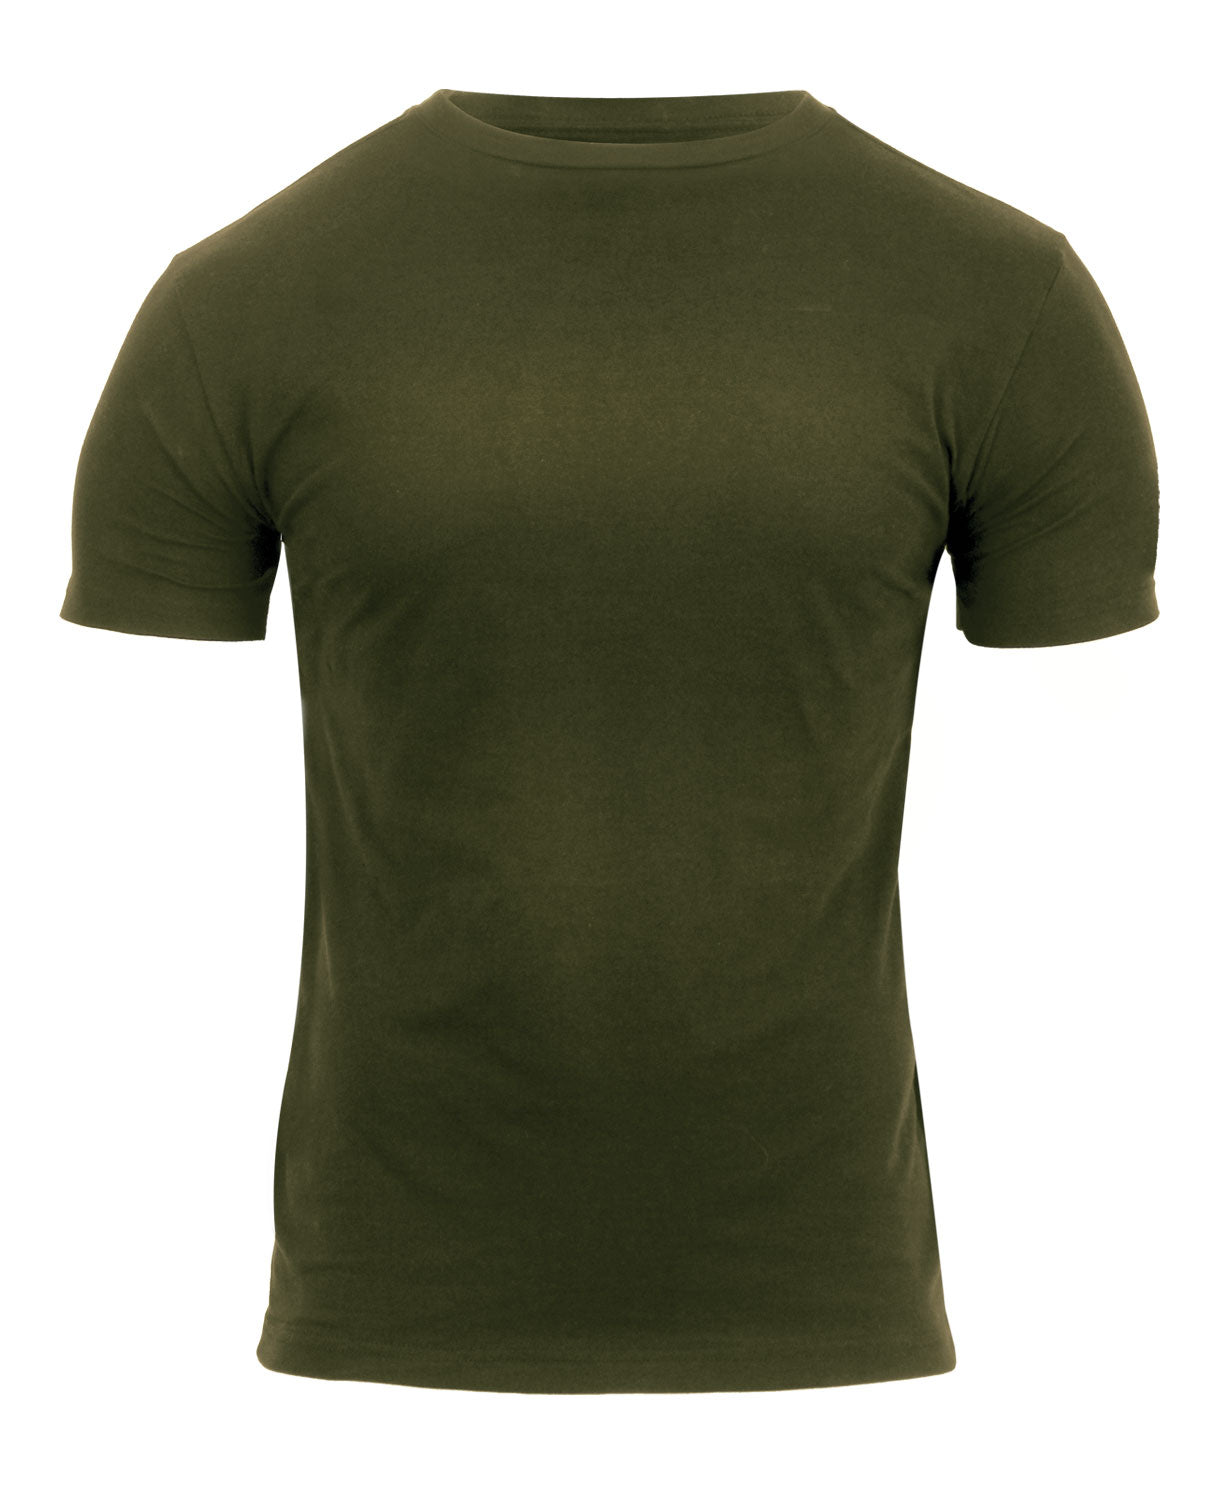 [AR 670-1] Poly/Cotton Athletic Fit T-Shirts Olive Drab